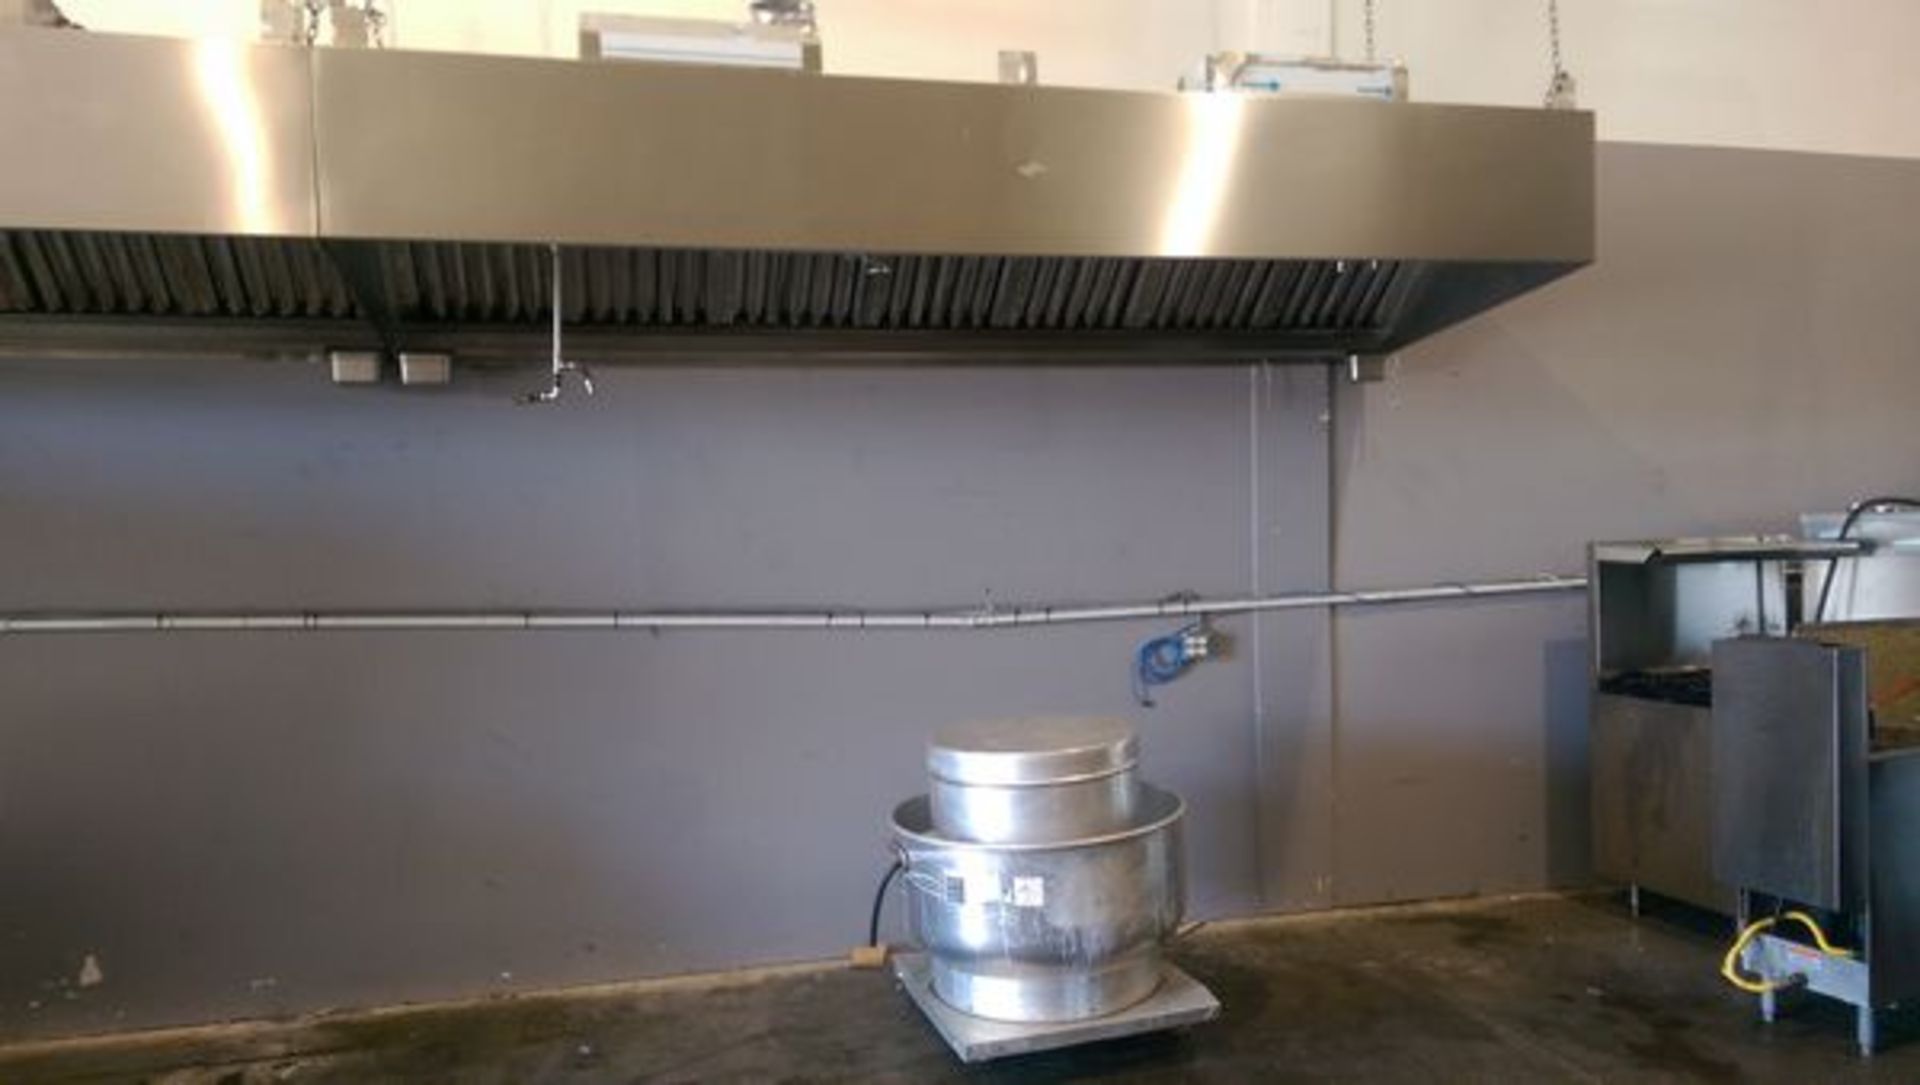 Approx. 140" NSC All Stainless Steel Canopy - Complete with Built In Air Return, Lights, Fire